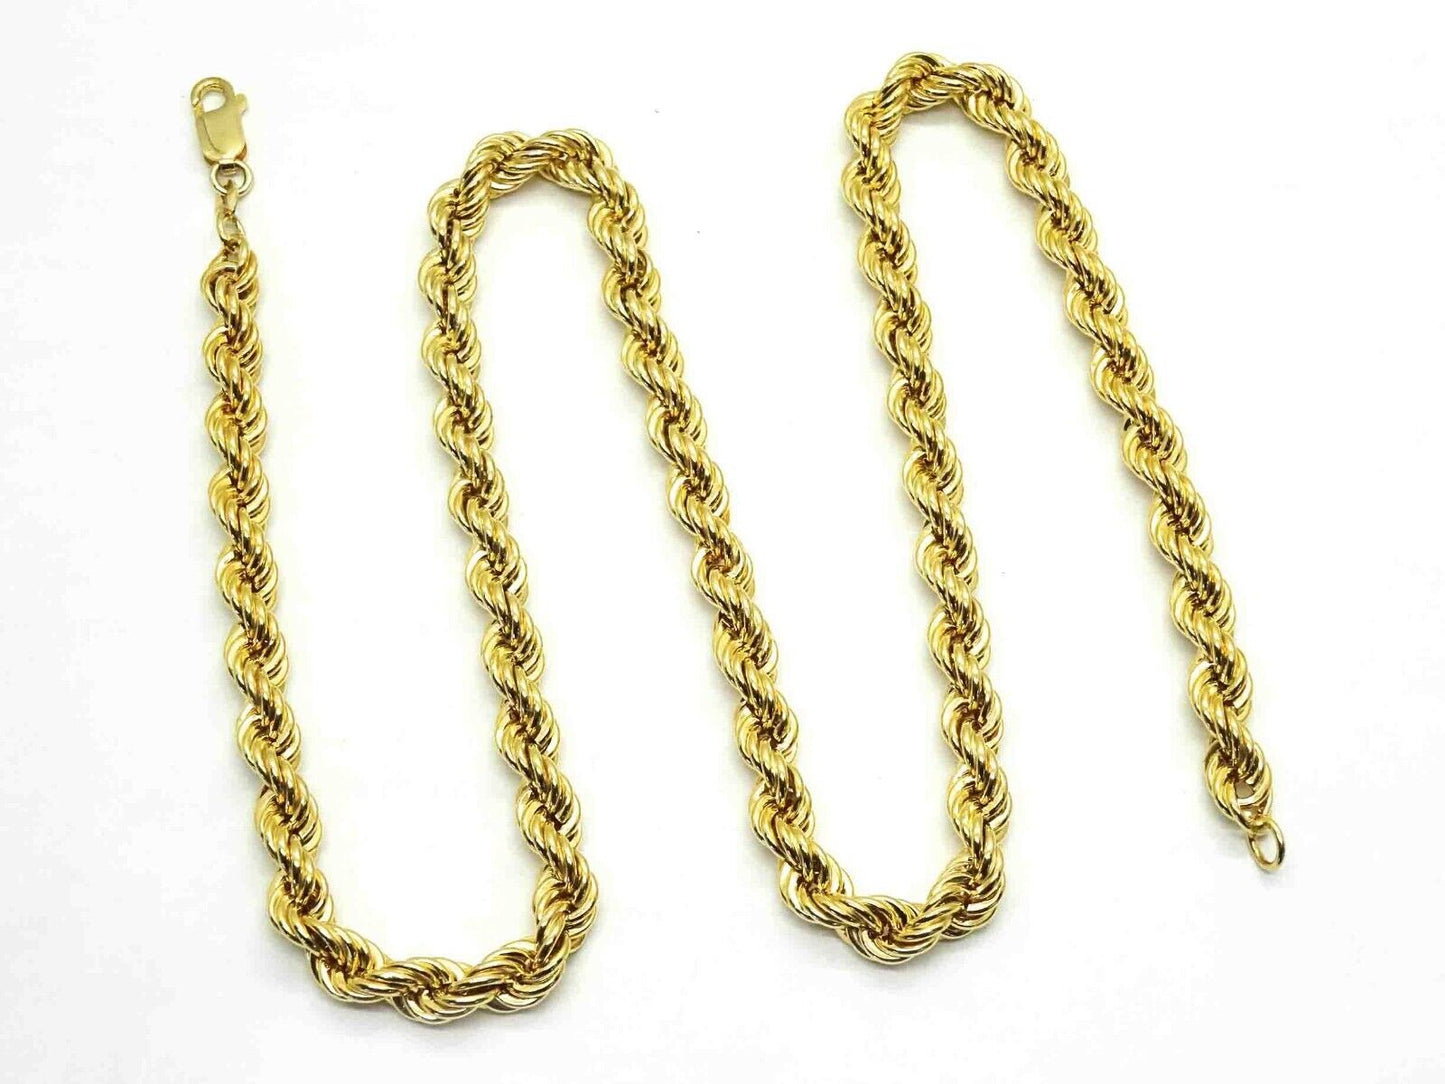 7mm Wide Rope Chain Necklace 10k Gold 22" Long 20.7 Grams